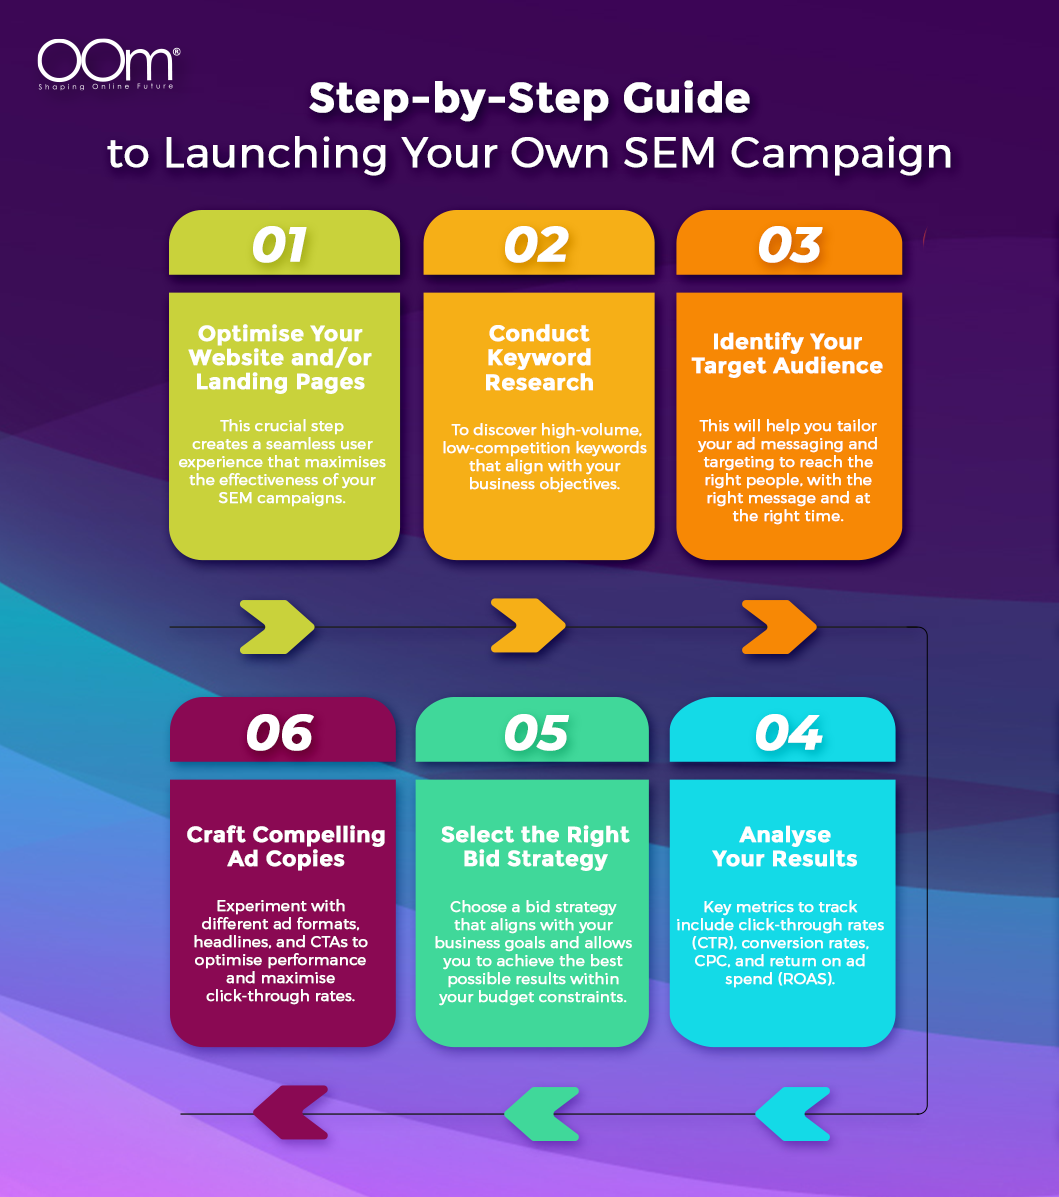 Step By Step Guide to Launching Your Own SEM Campaign